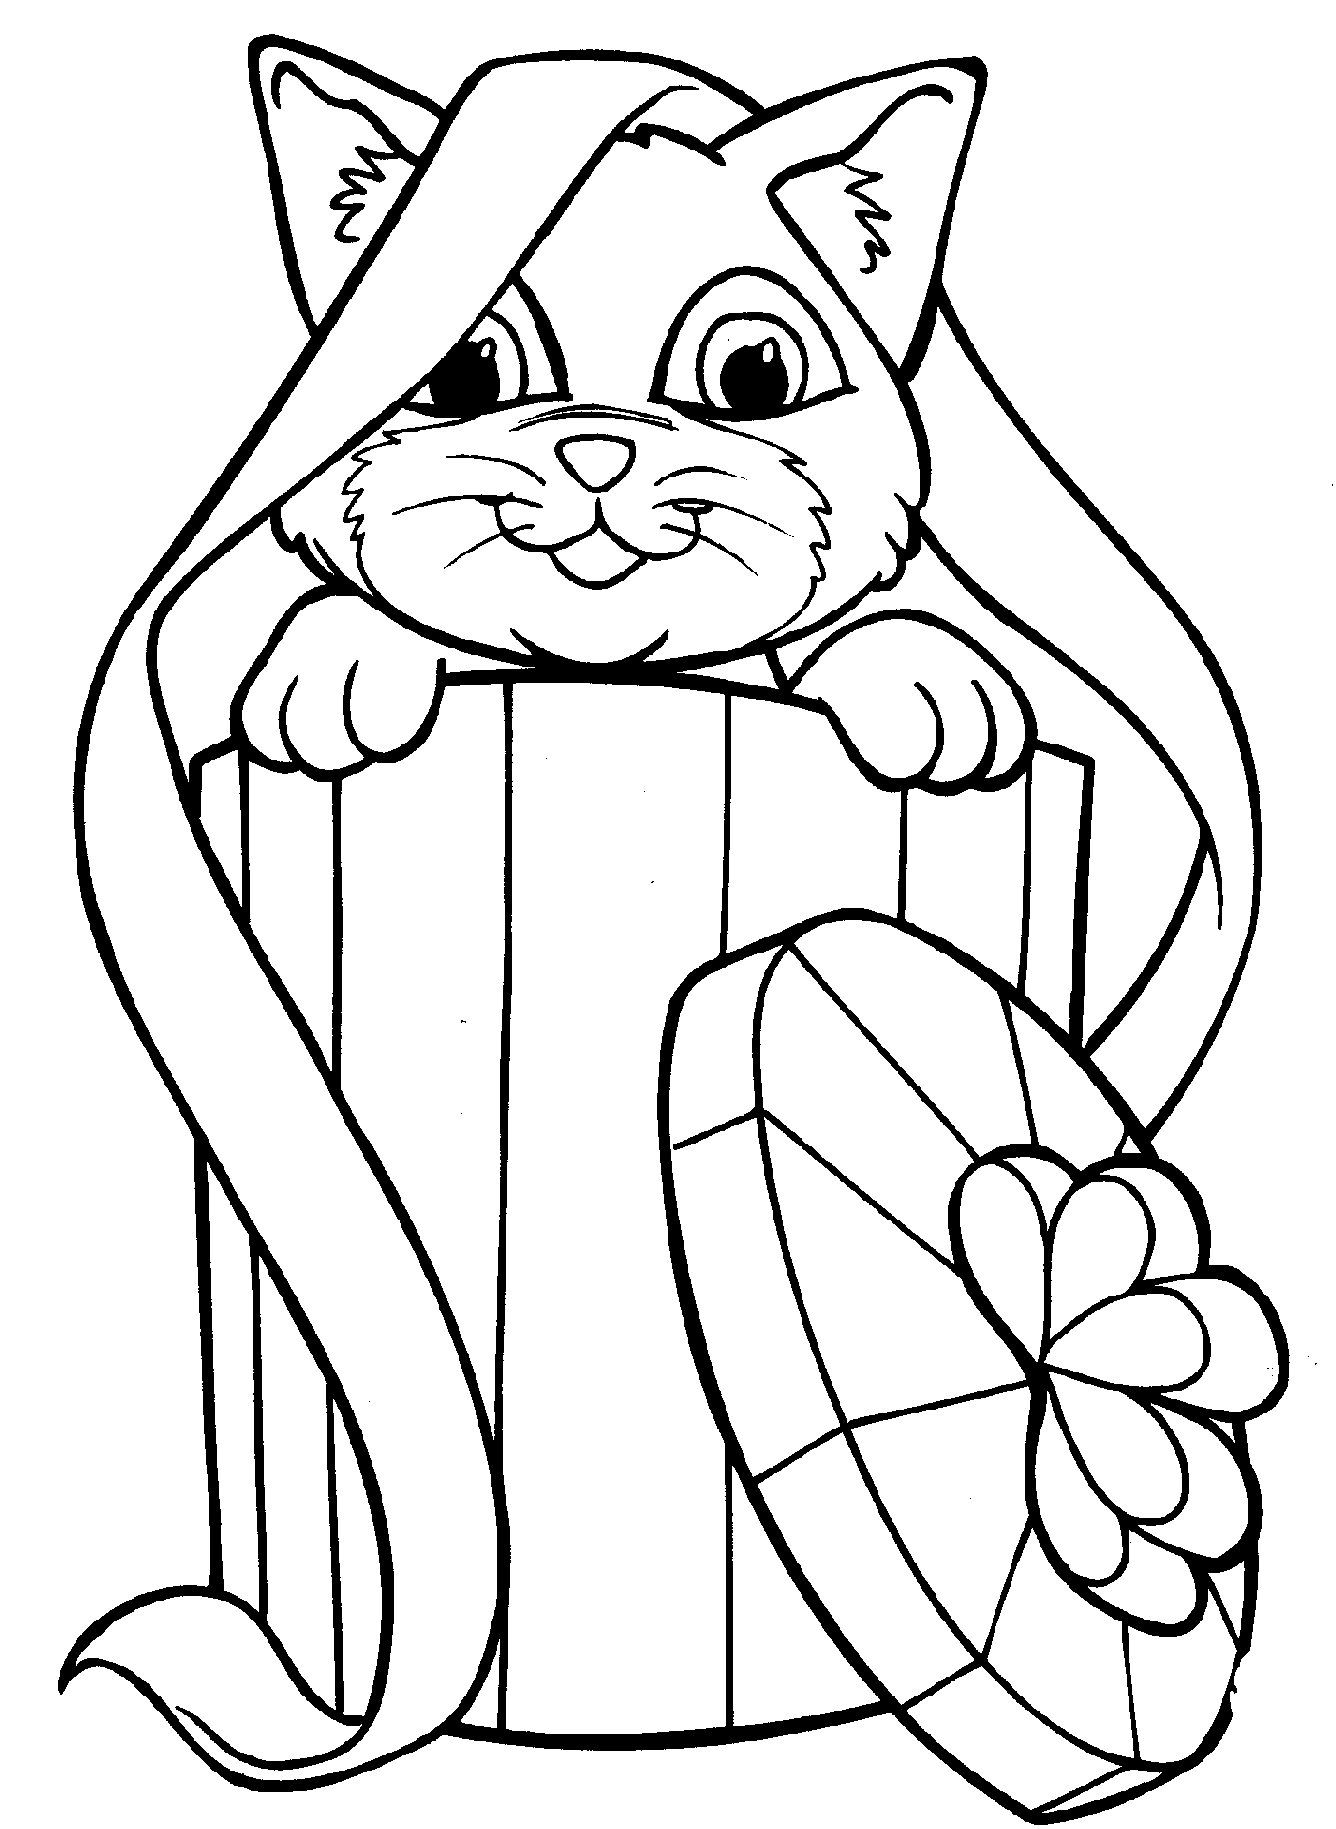 kitty pictures to print free printable kitten coloring pages for kids best print pictures kitty to 